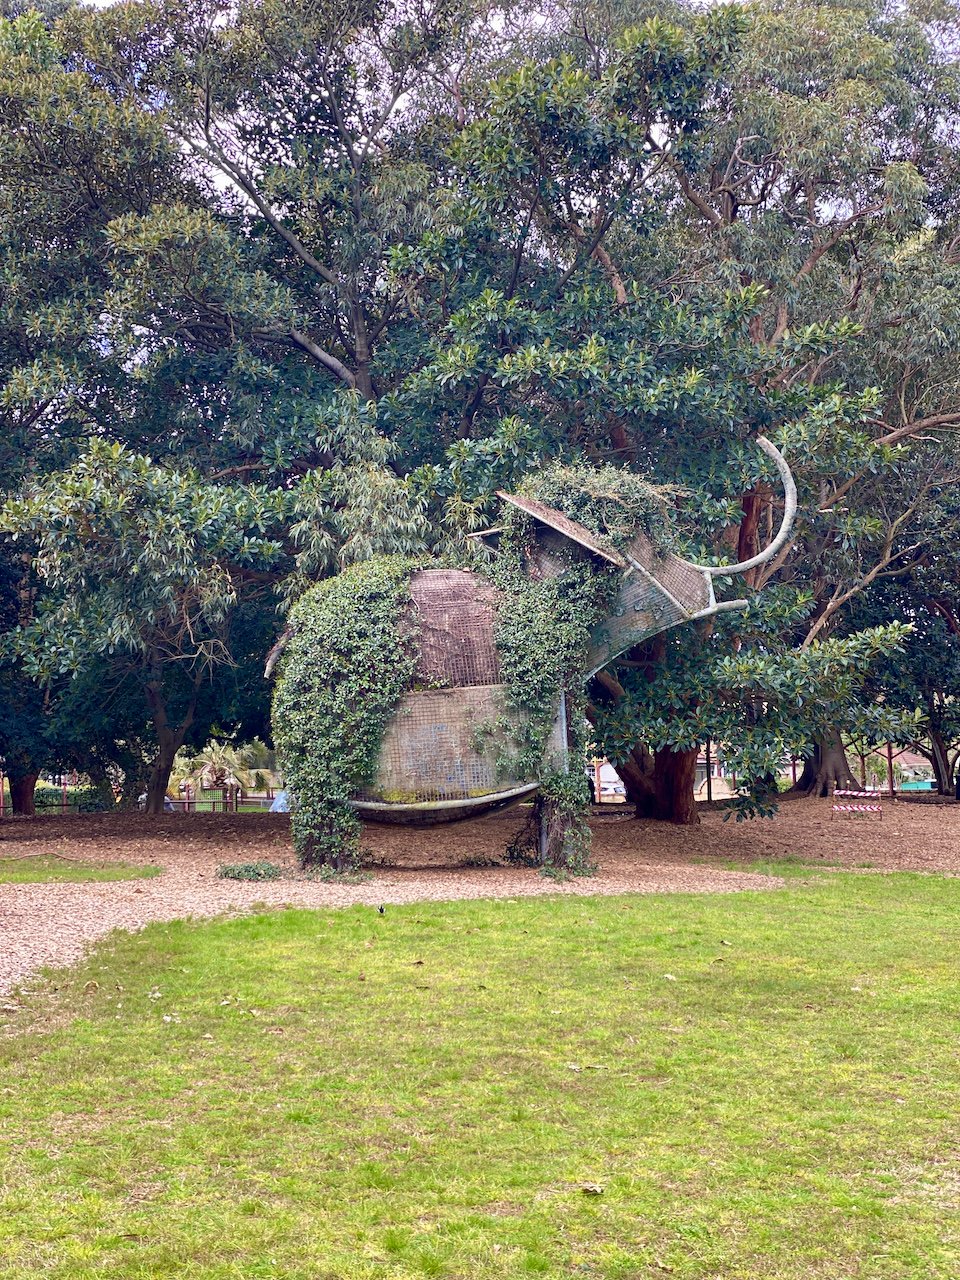 Elephant topiary in the park